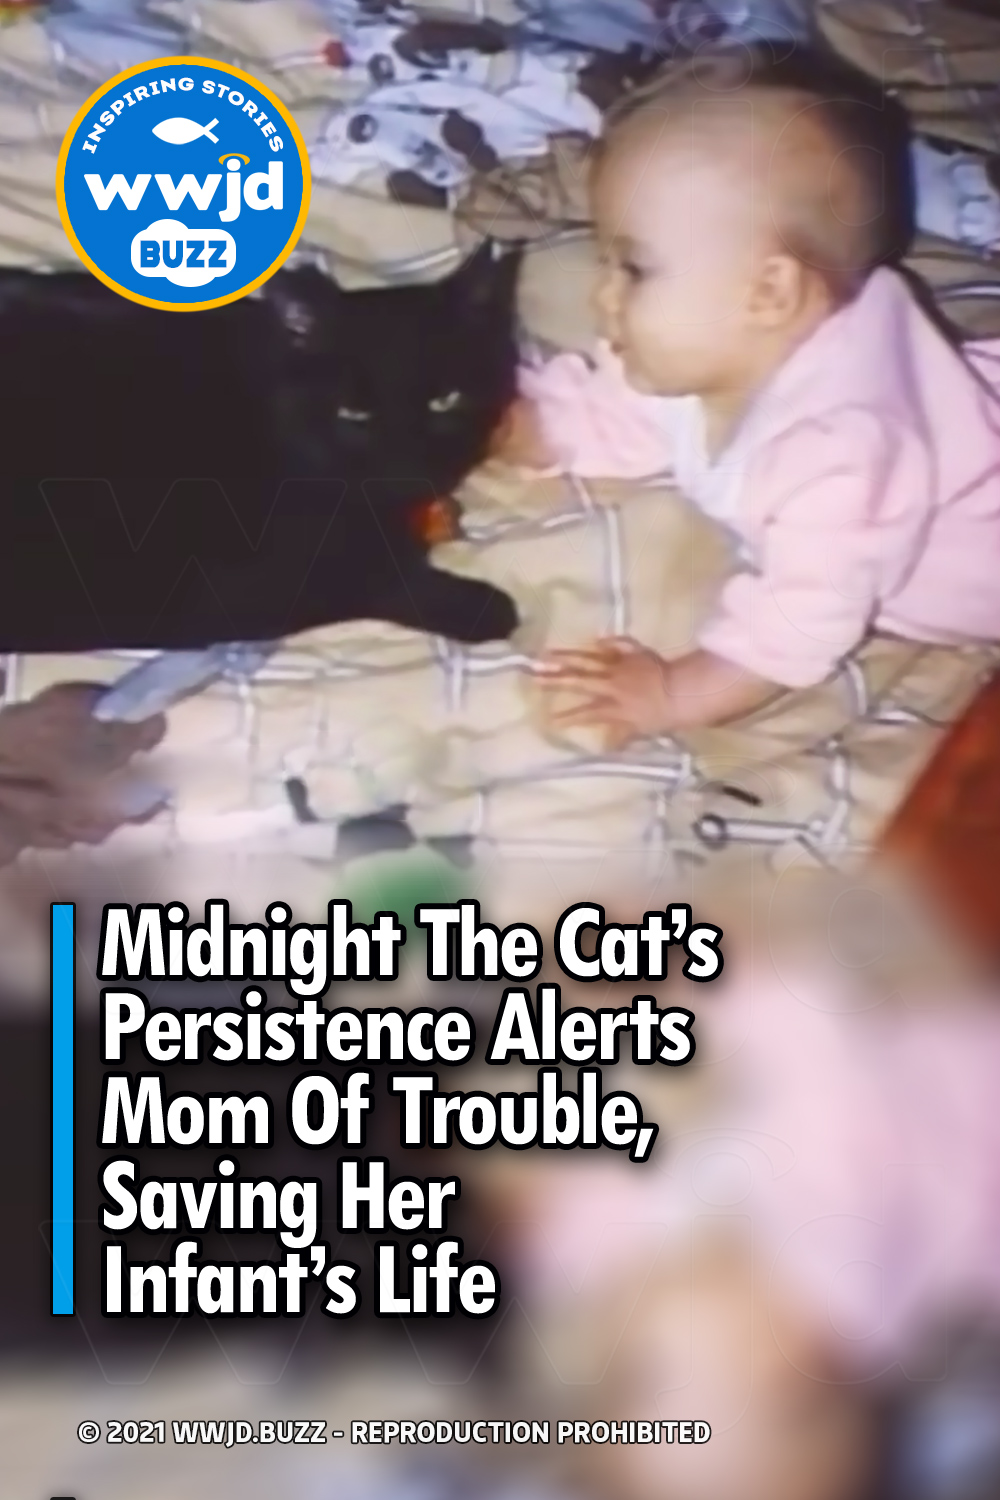 Midnight The Cat’s Persistence Alerts Mom Of Trouble, Saving Her Infant’s Life